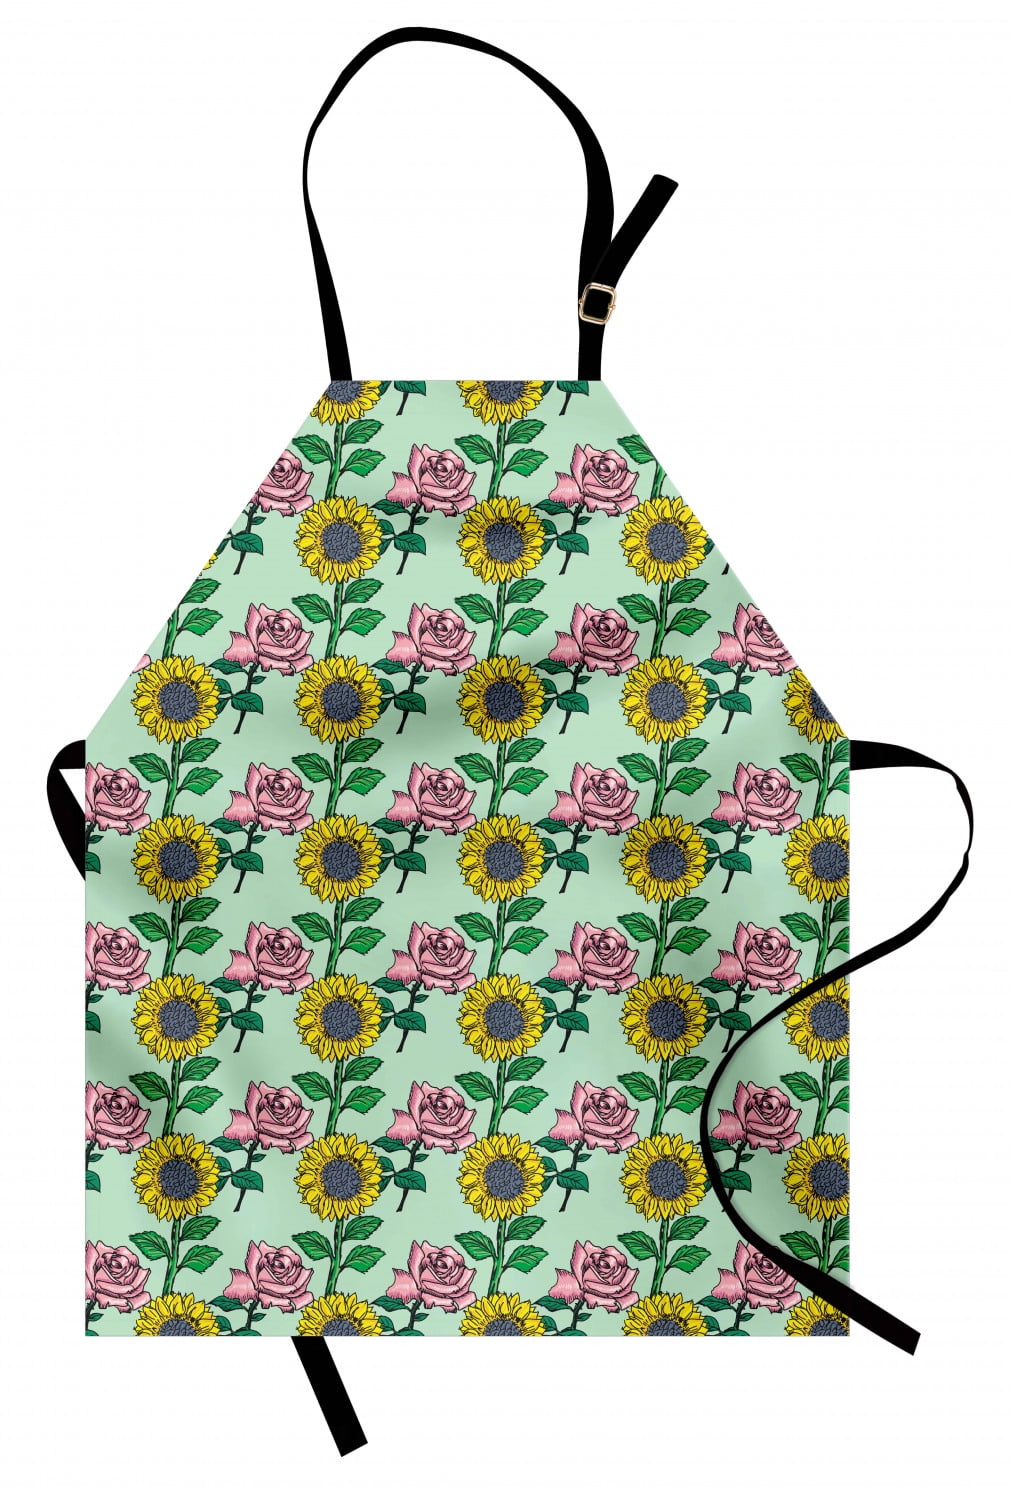 Details about   Ambesonne Blooming Apron Unisex Kitchen Bib with Adjustable Neck Cooking Baking 